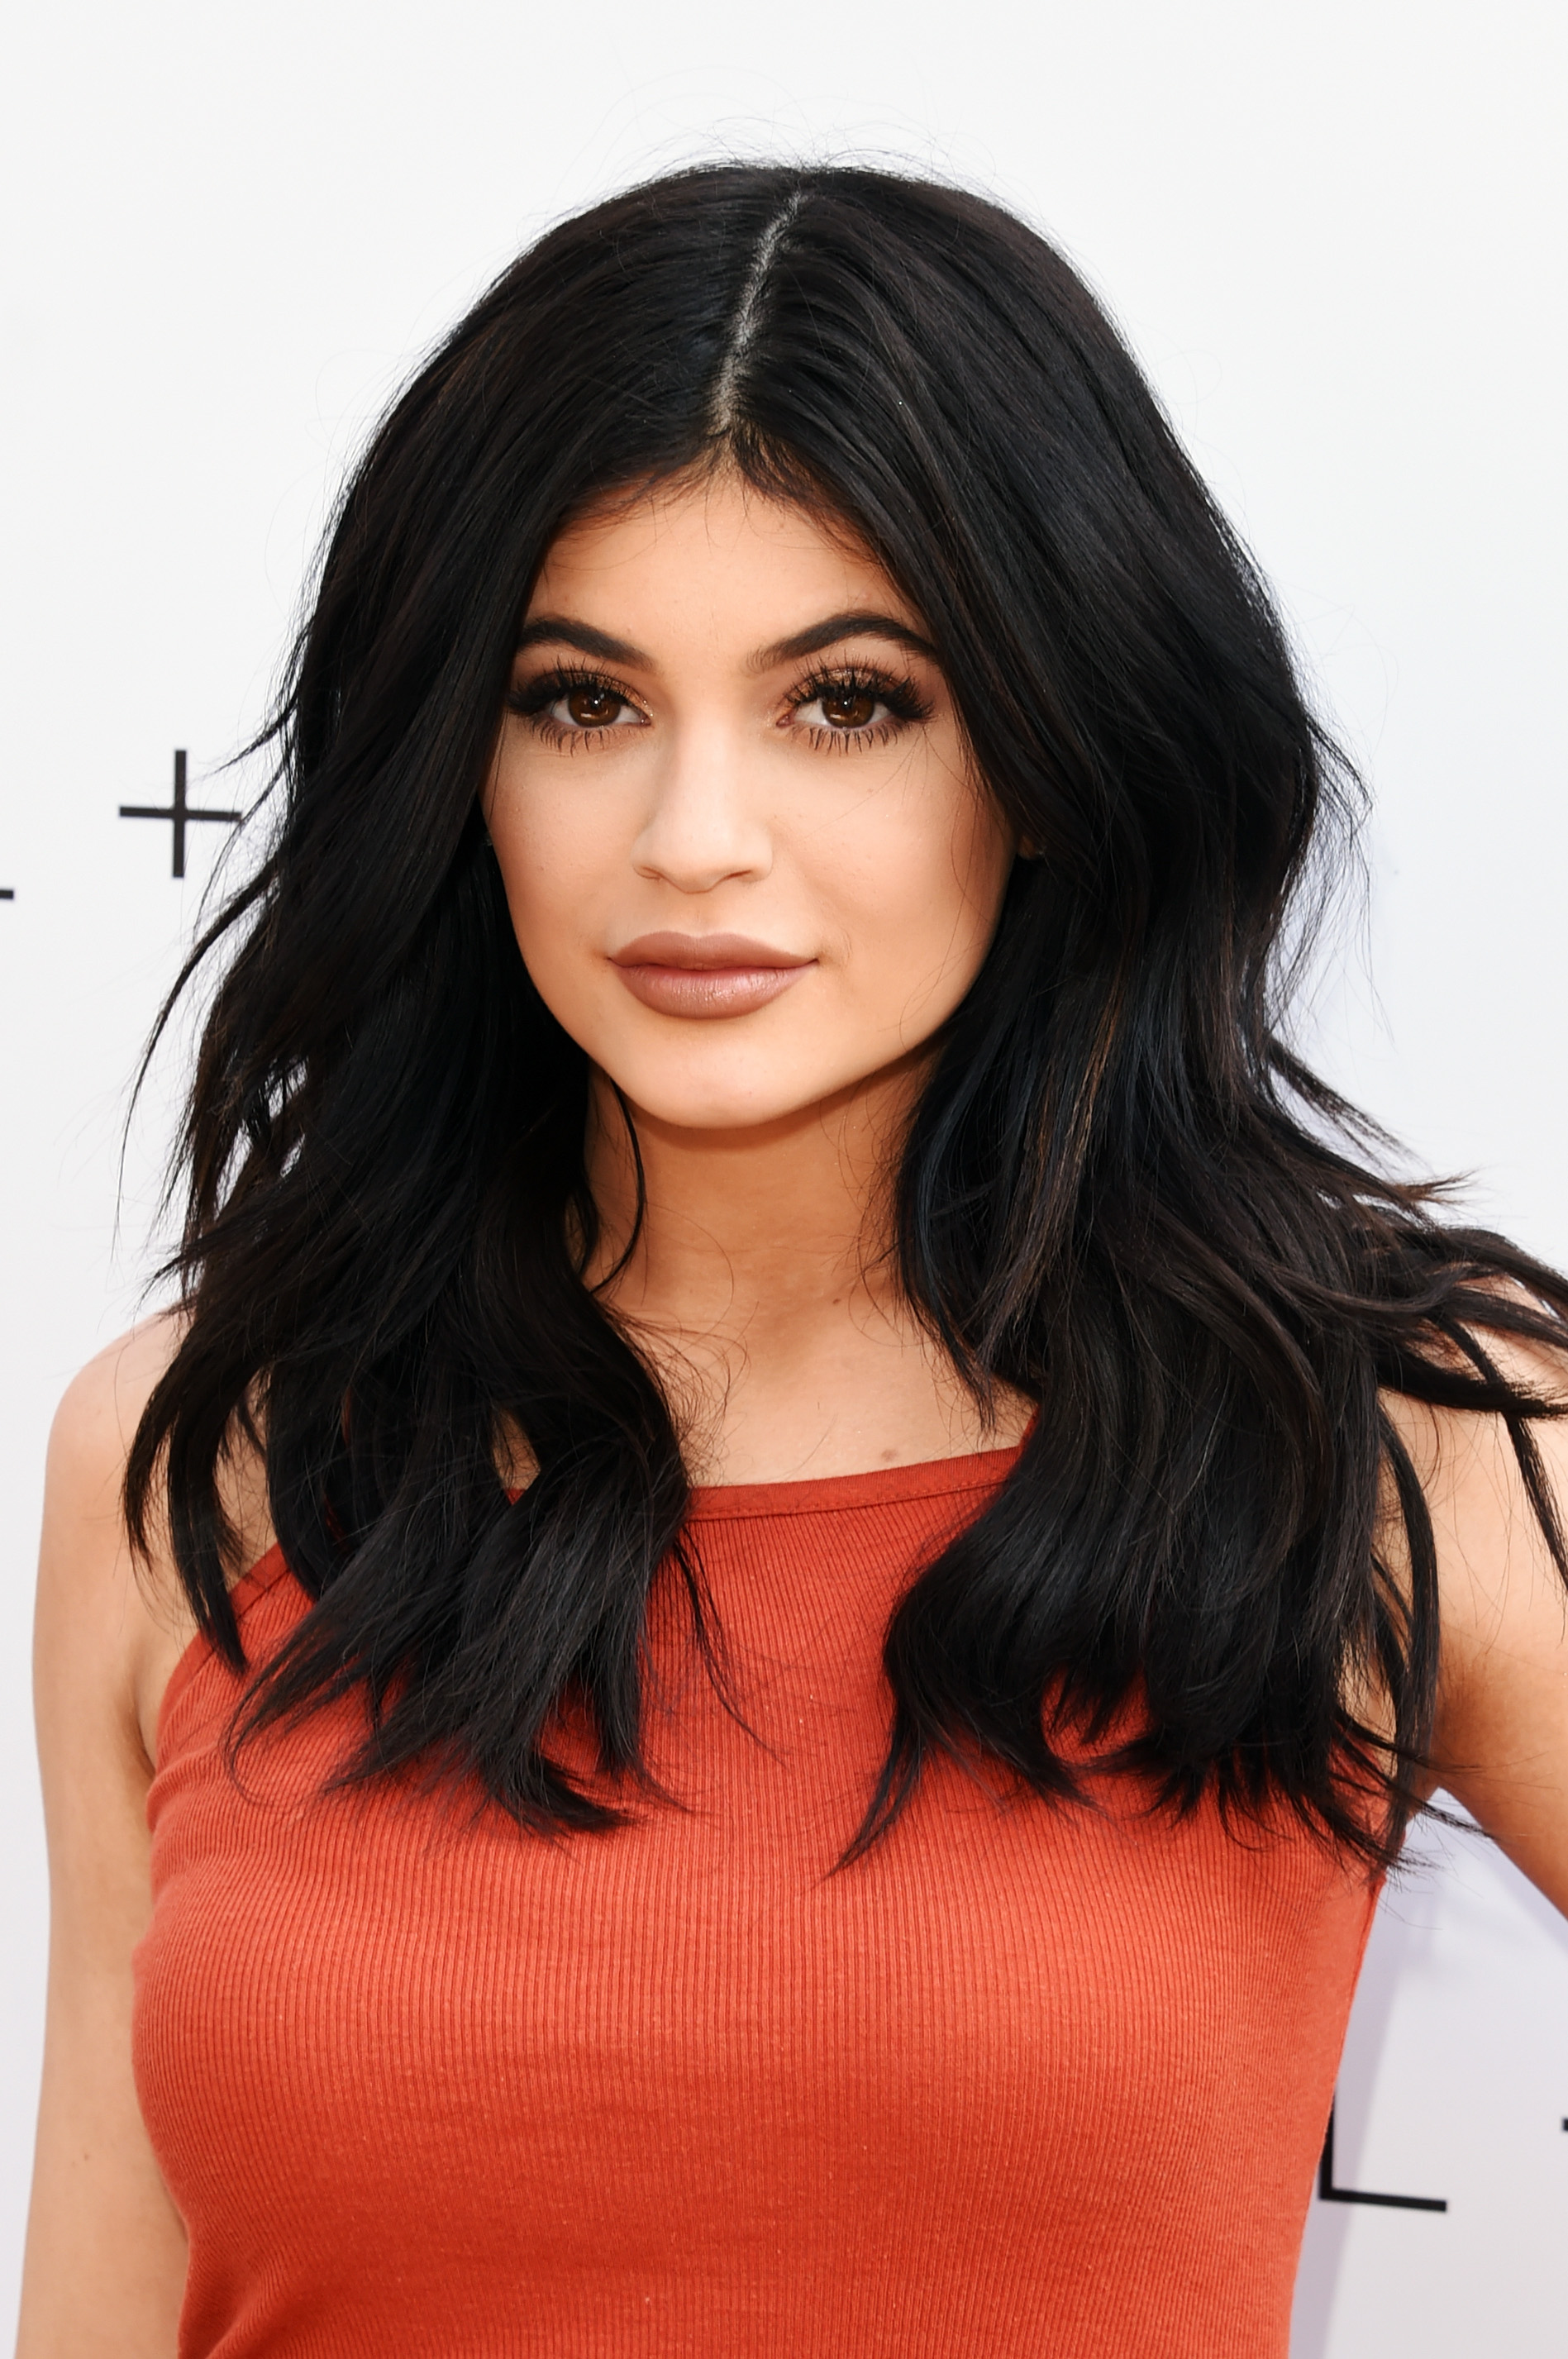 How To Dye Brown Hair Blonde A La Kylie Jenner